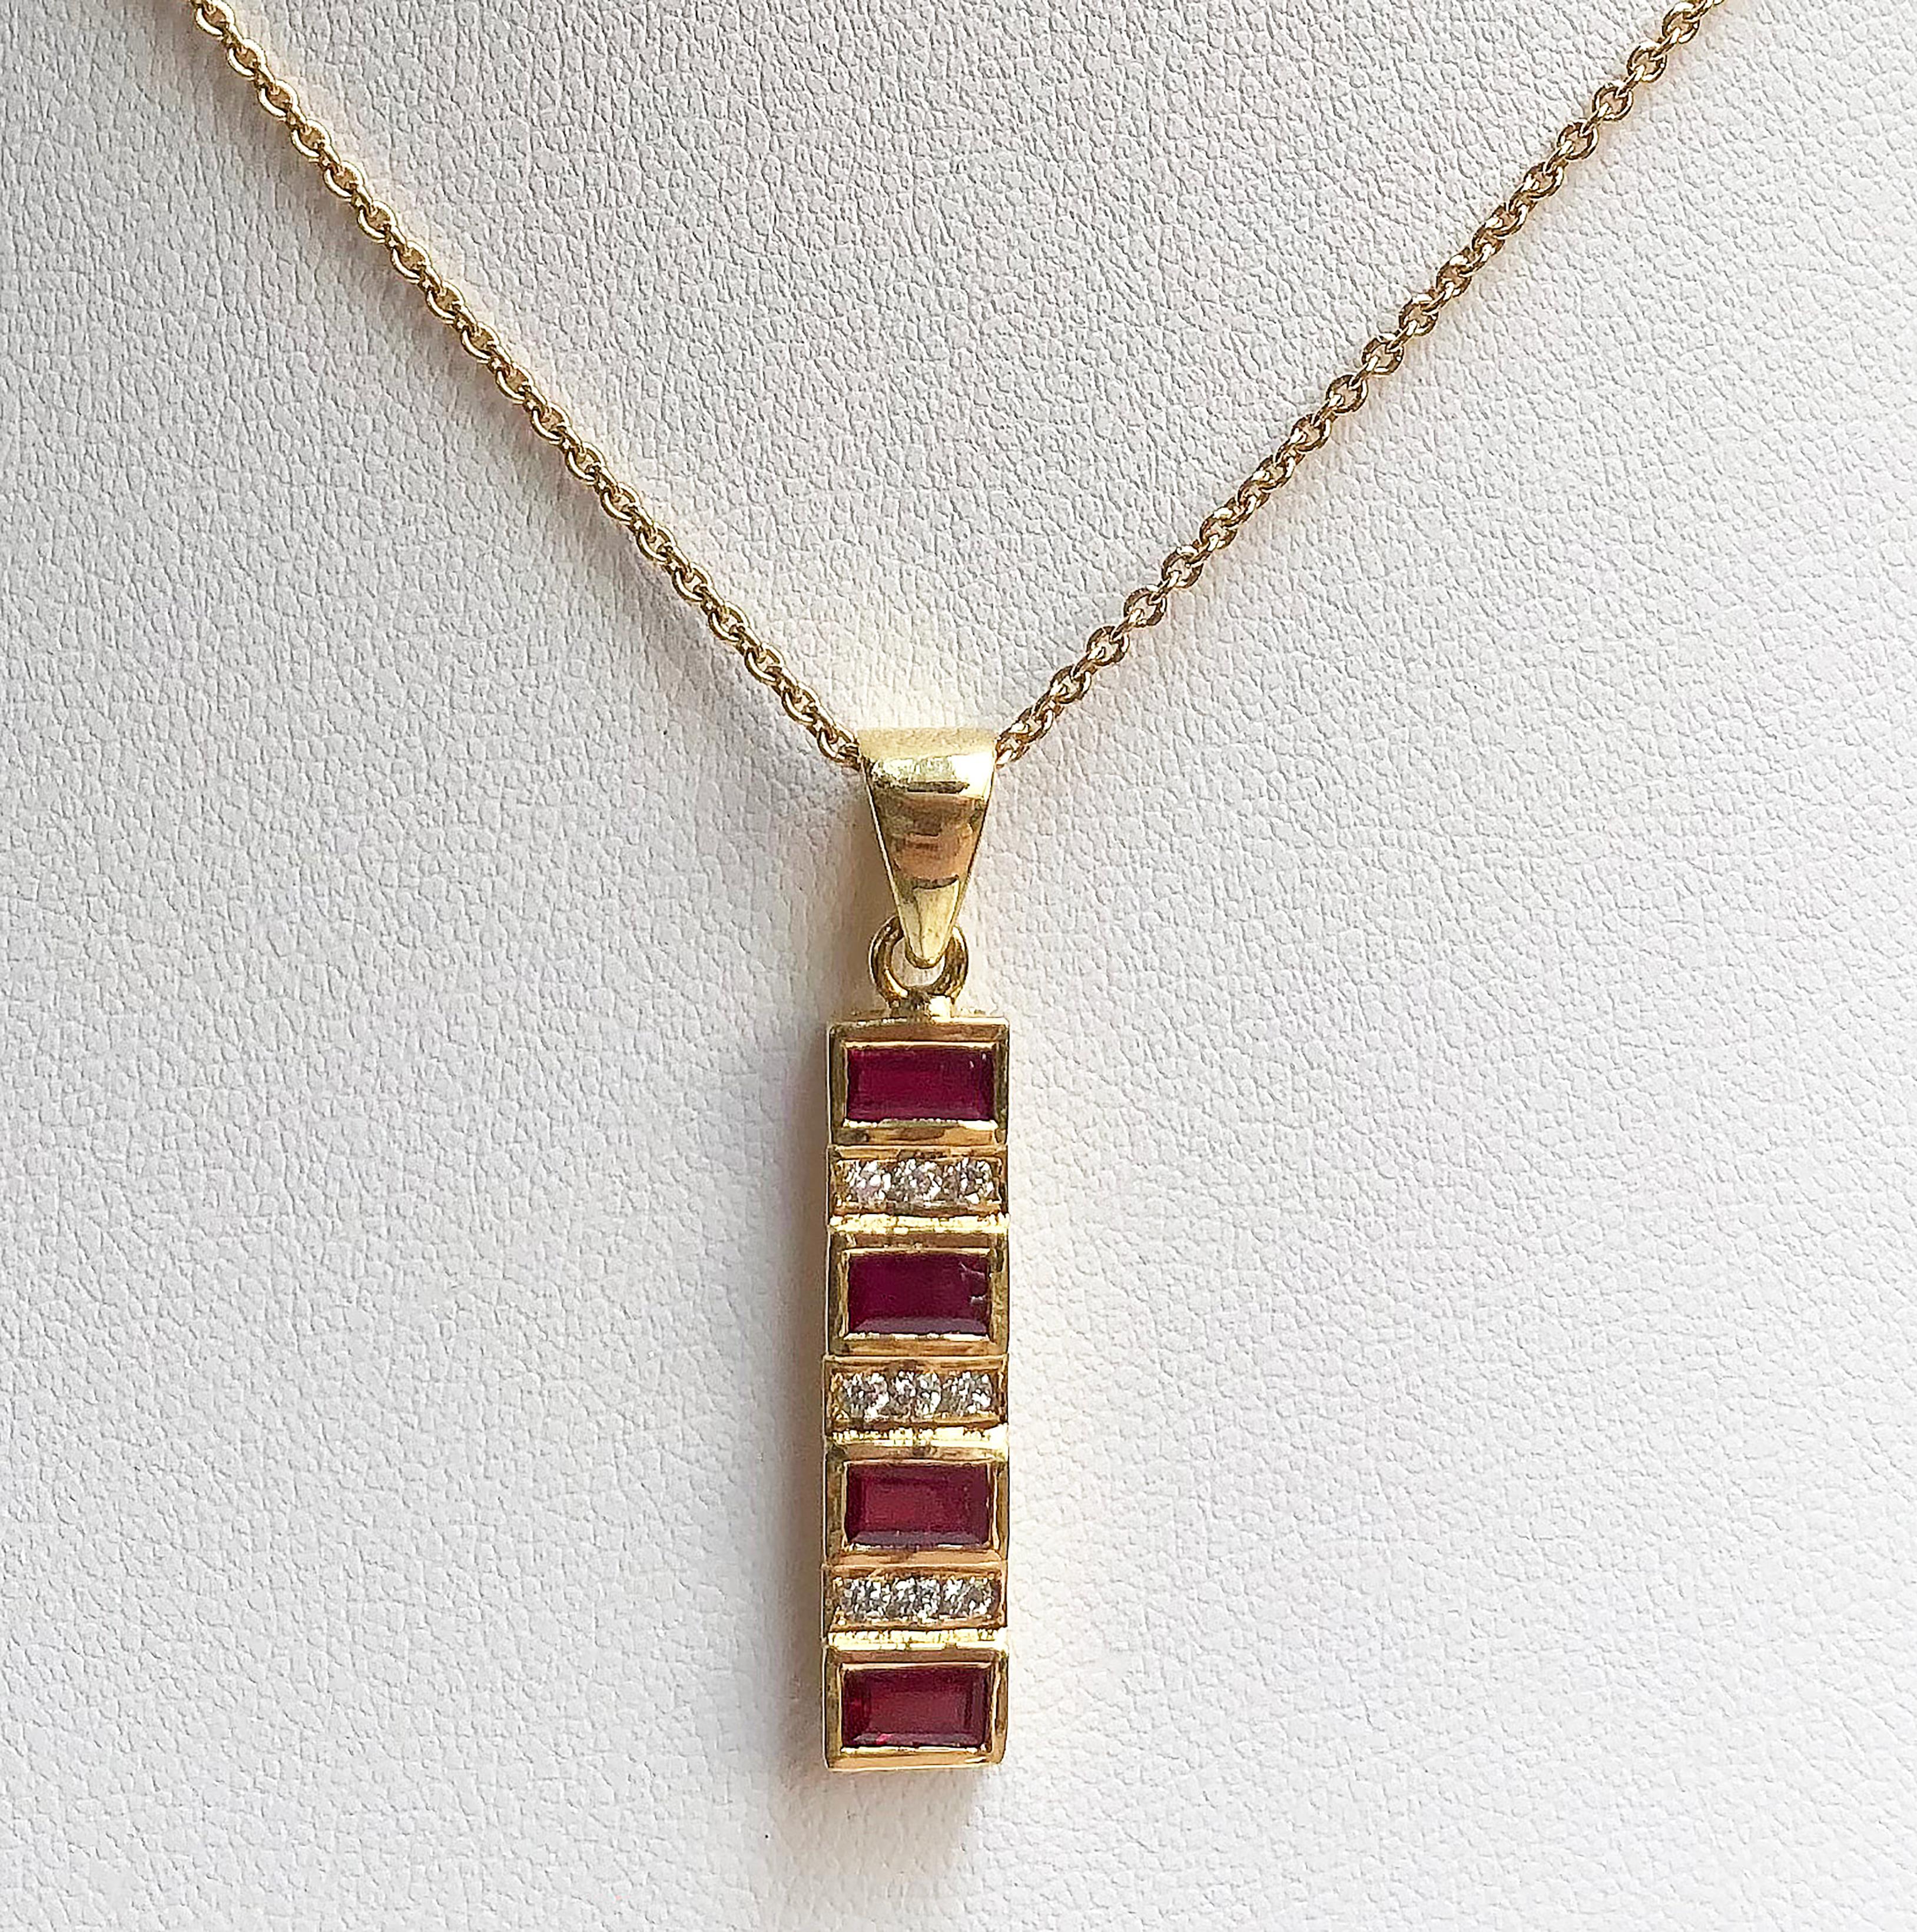 Ruby 1.38 carats with Diamond 0.18 carat Pendant set in 18 Karat Gold Settings
(chain not included)

Width:  0.6 cm 
Length: 3.5 cm
Total Weight: 3.77 grams

